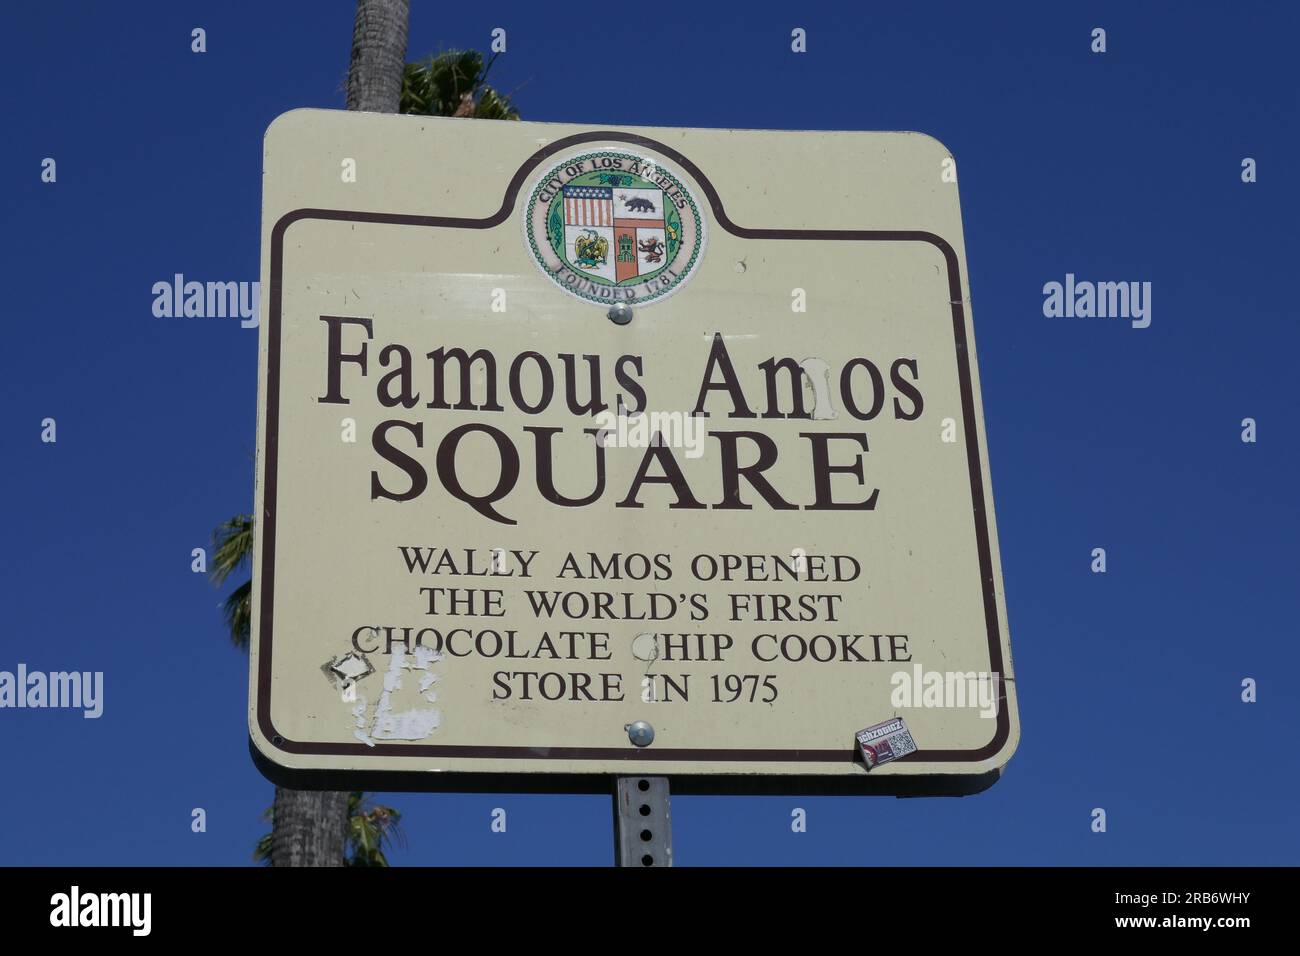 Los Angeles, California, USA 7th July 2023 Famous Amos Square on Sunset Blvd on July 7, 2023 in Los Angeles, California, USA. Photo by Barry King/Alamy Stock Photo Stock Photo